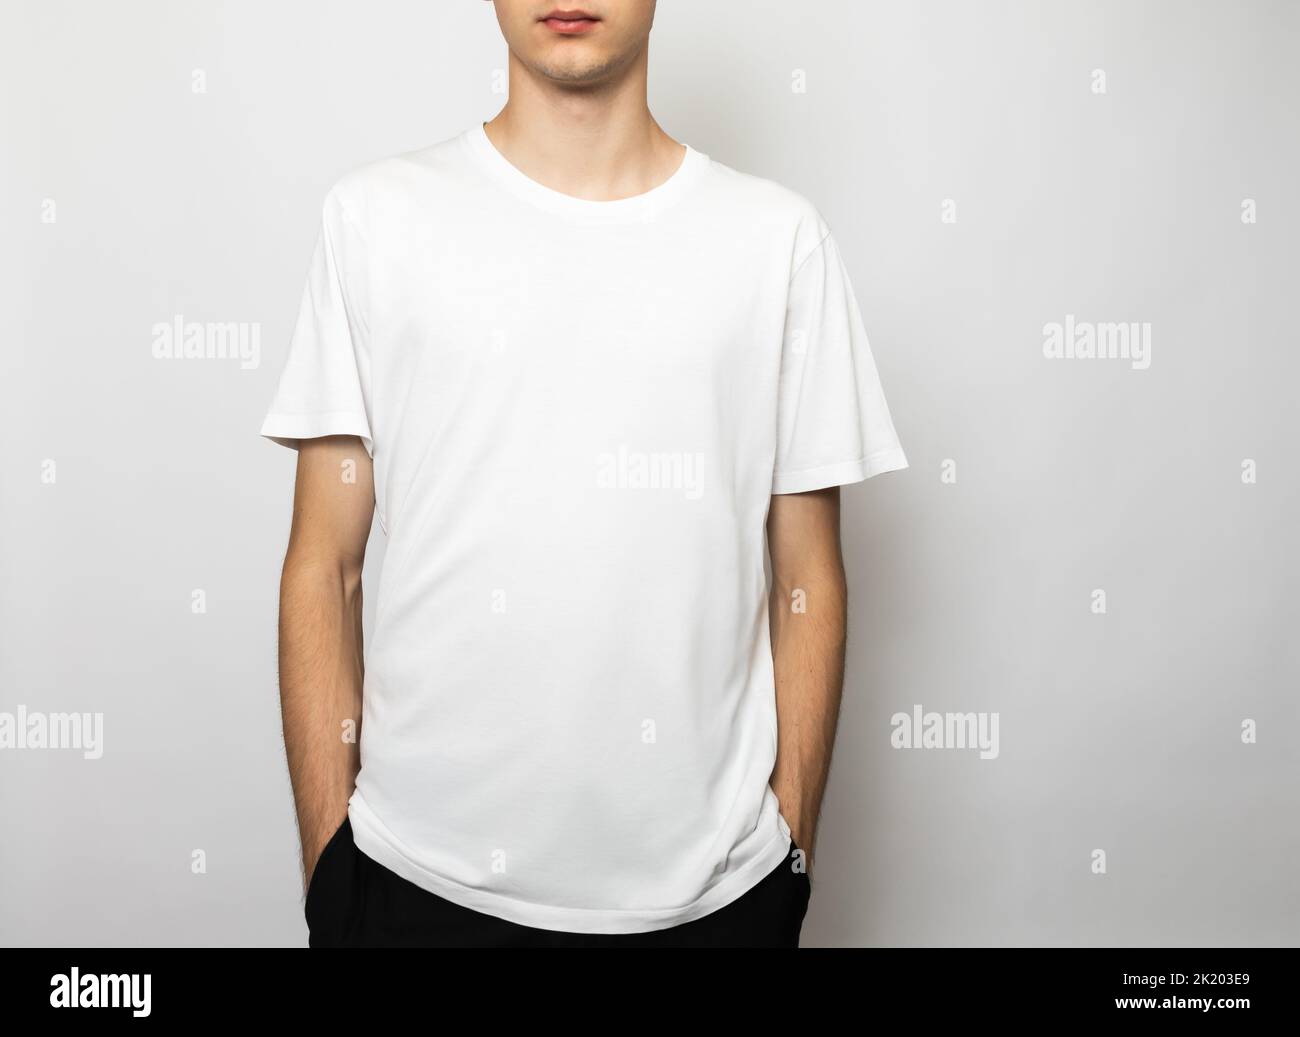 Relaxed young man wearing blank white cotton T-Shirt. Studio shot on gray background Stock Photo